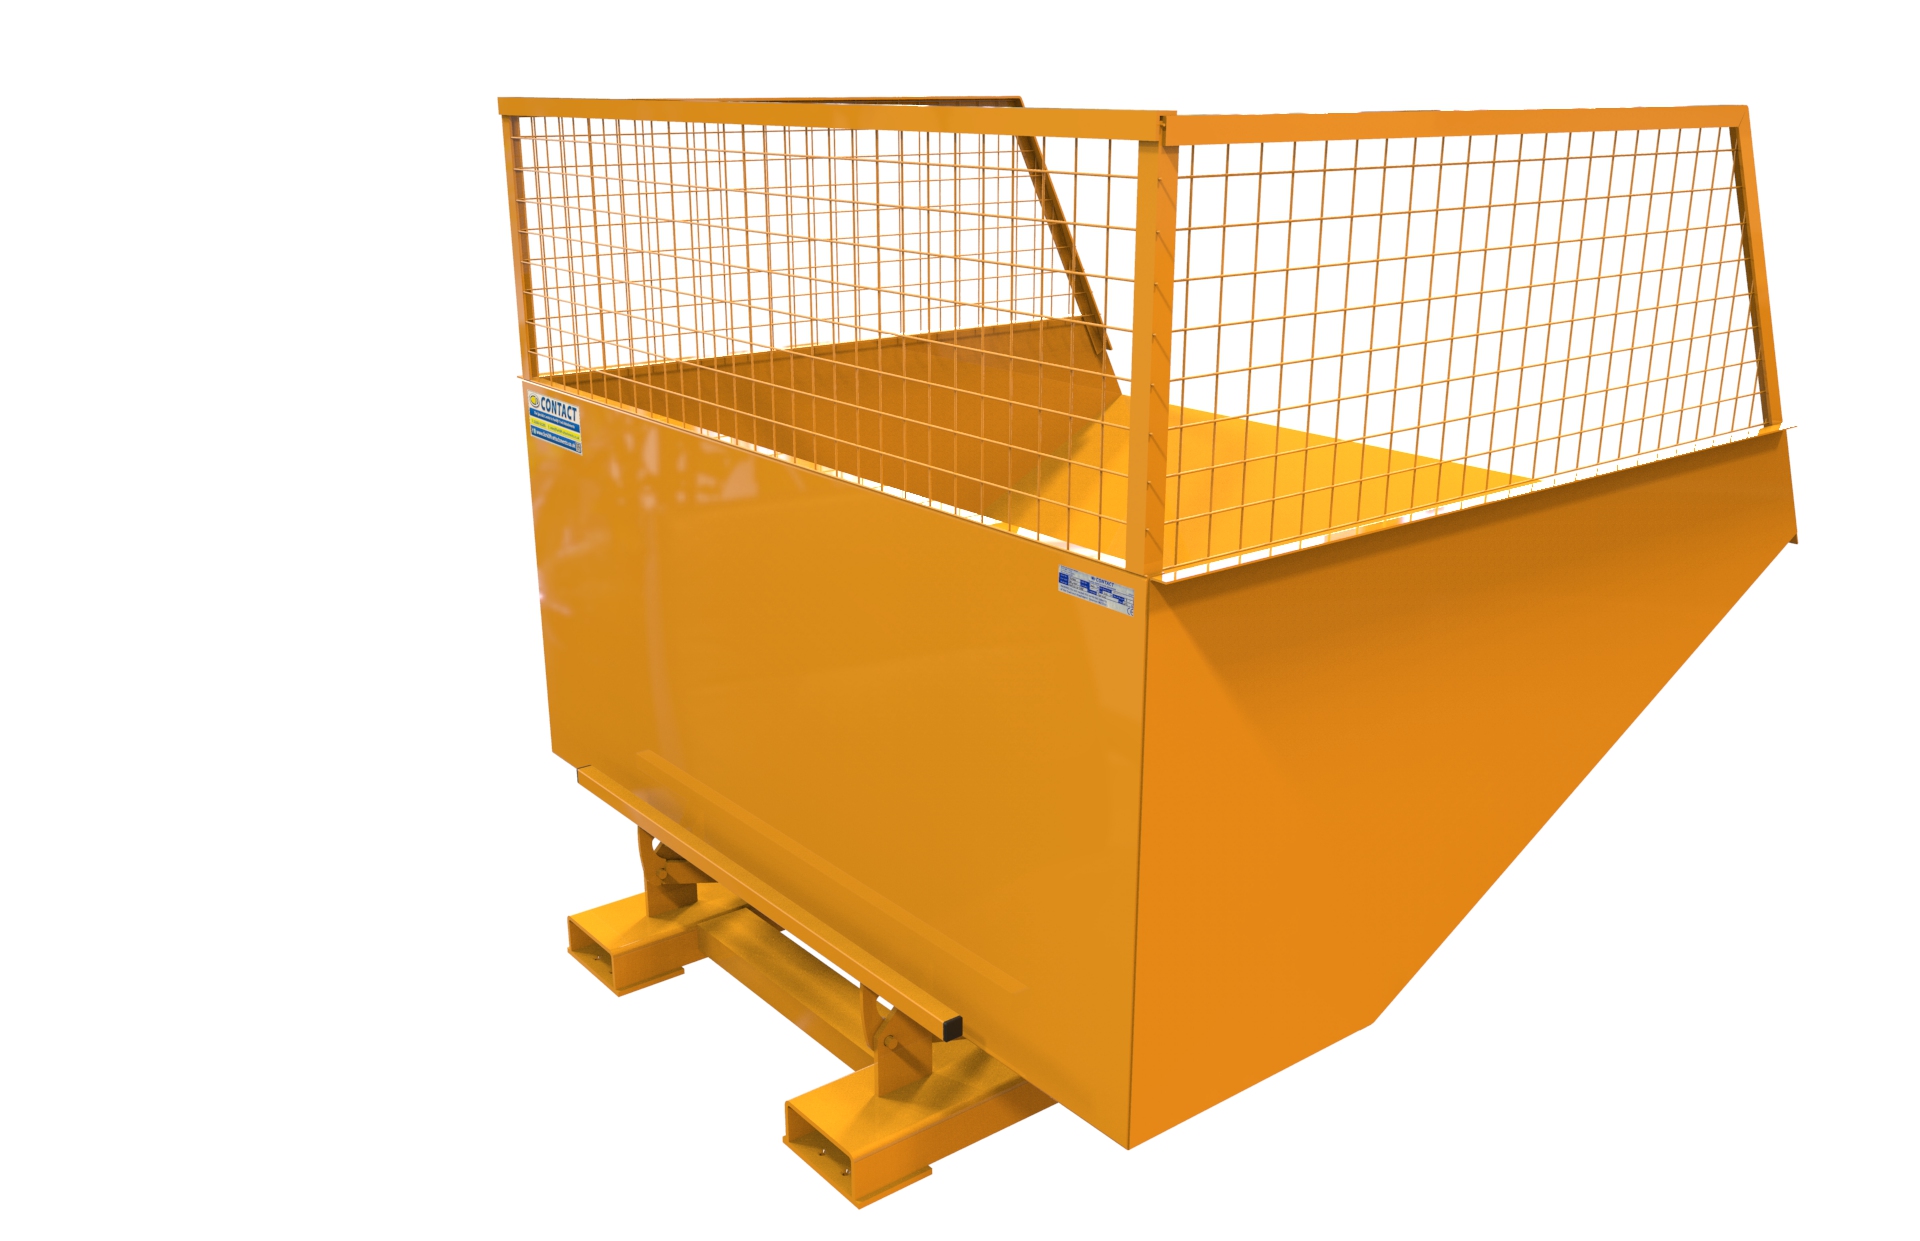 Roll Forward Tipping Skip - Mesh Extension Sides